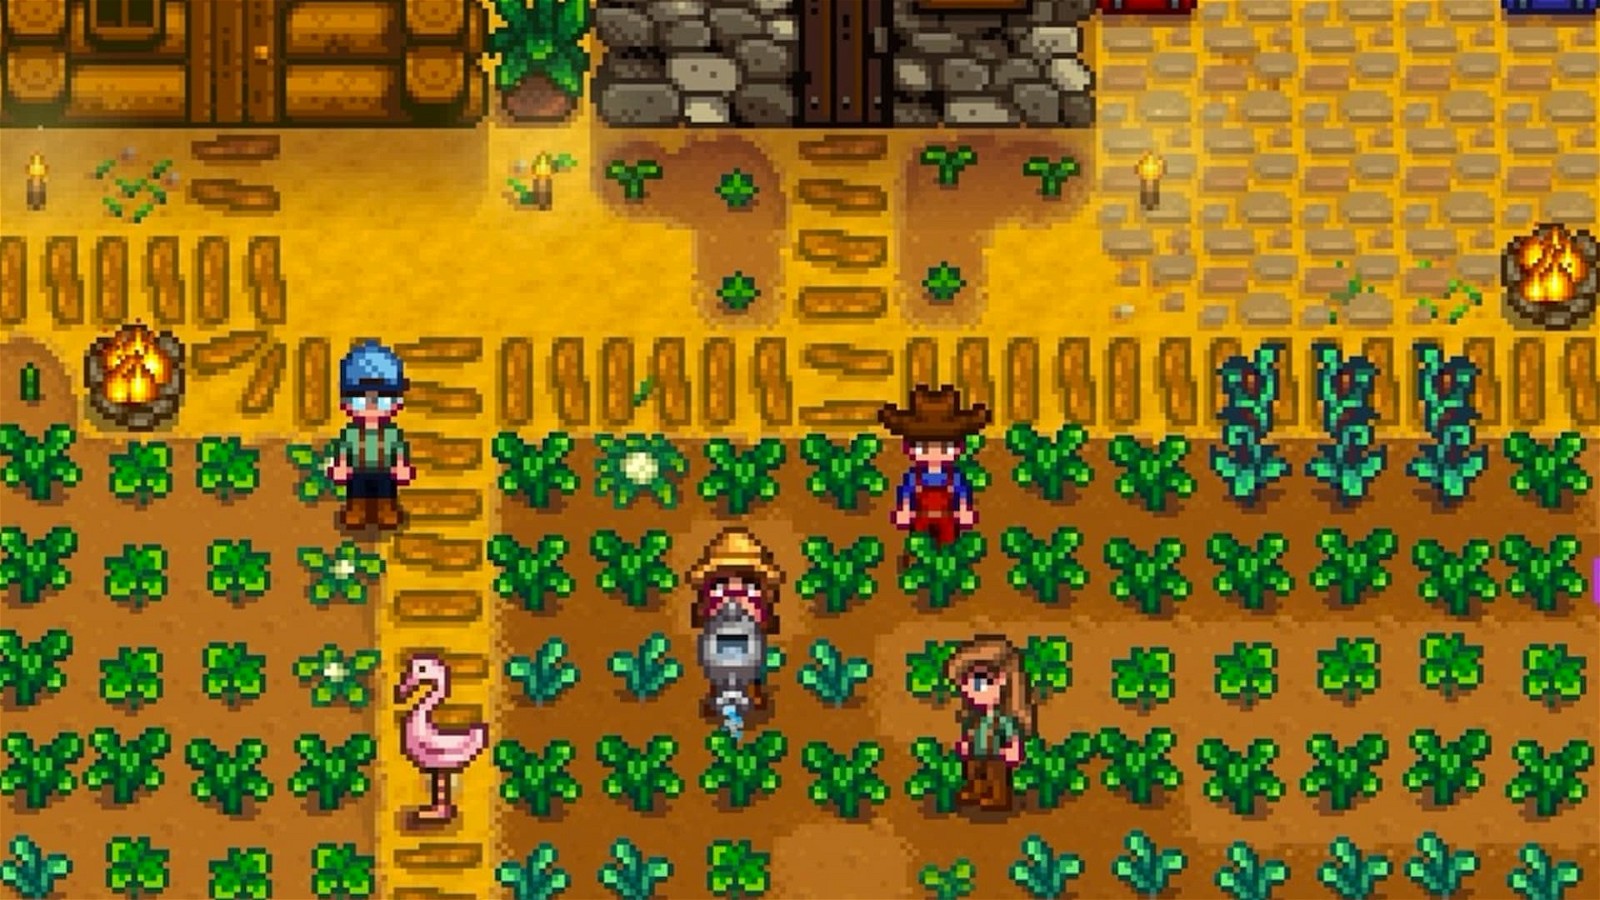 Stardew Valley will support 8 players in multiplayer on PC with the update.